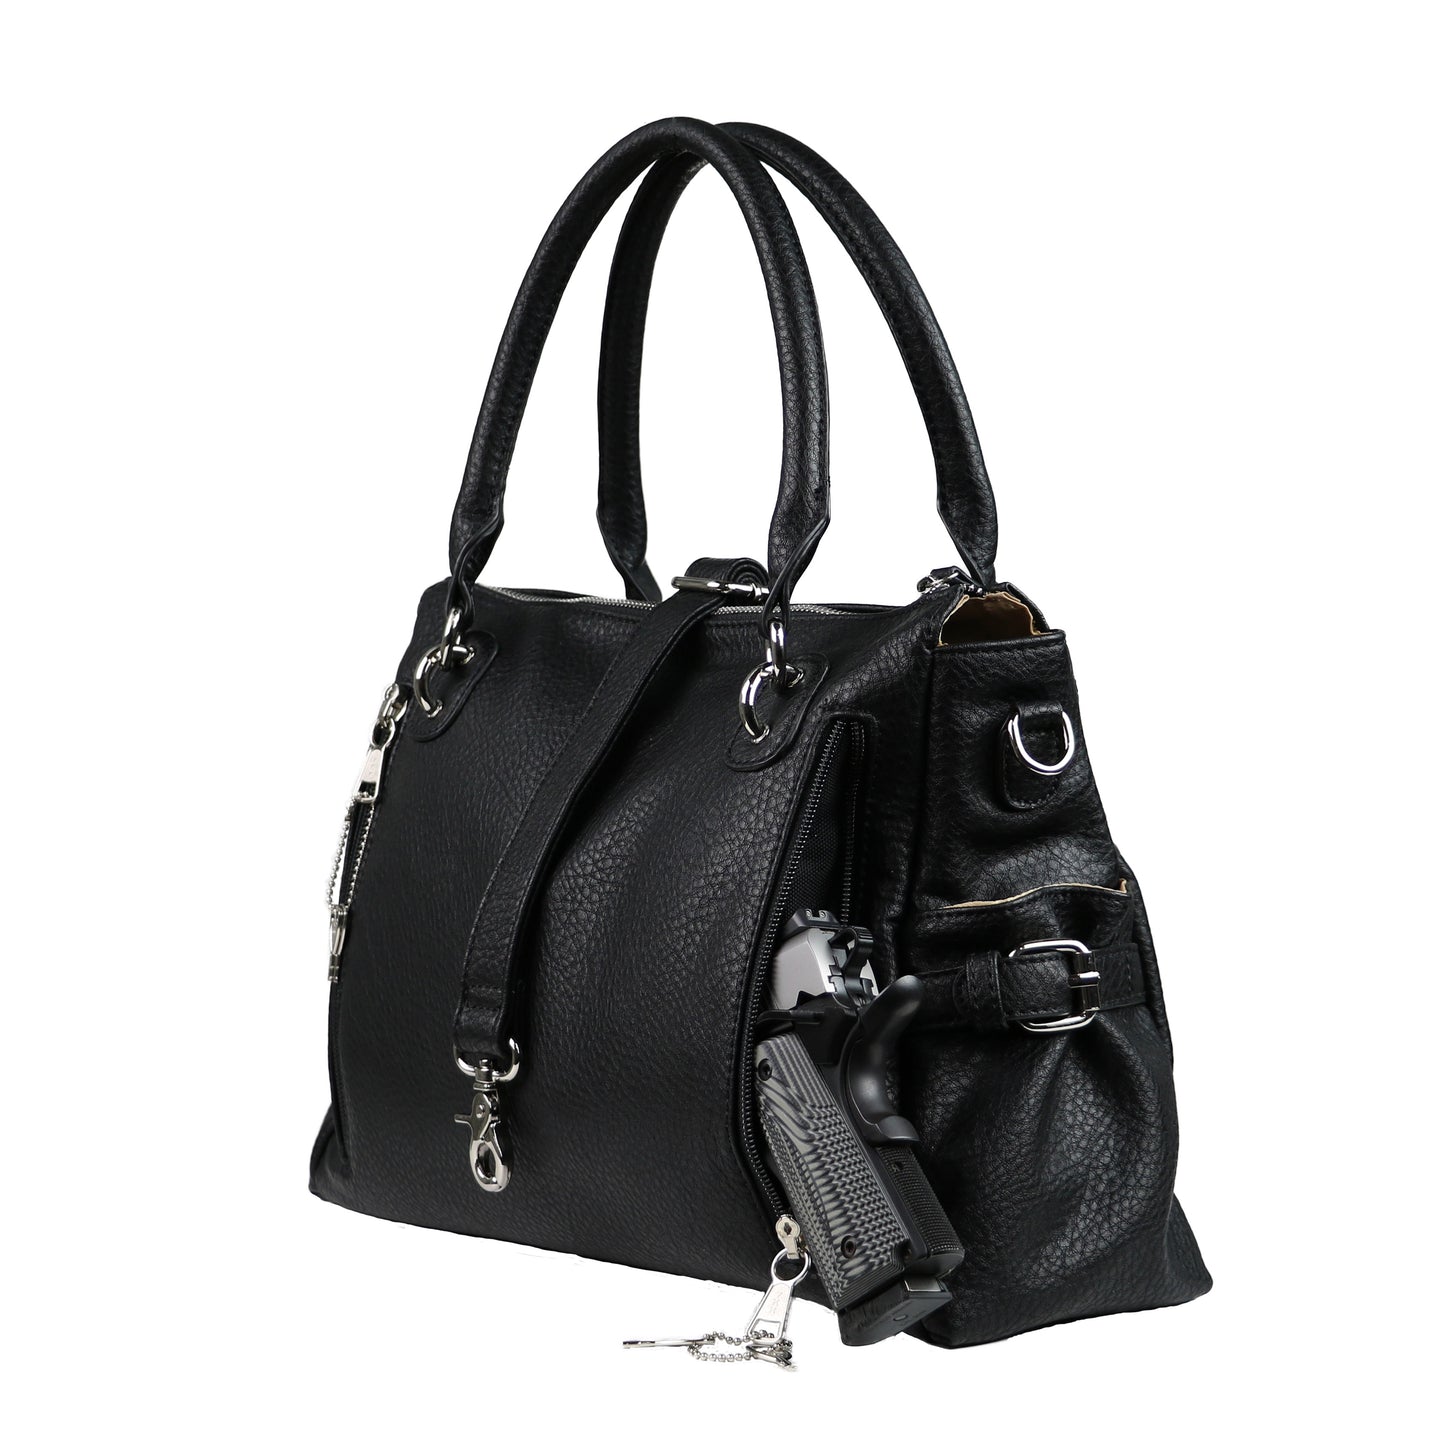 CONCEALED CARRY JESSICA SATCHEL